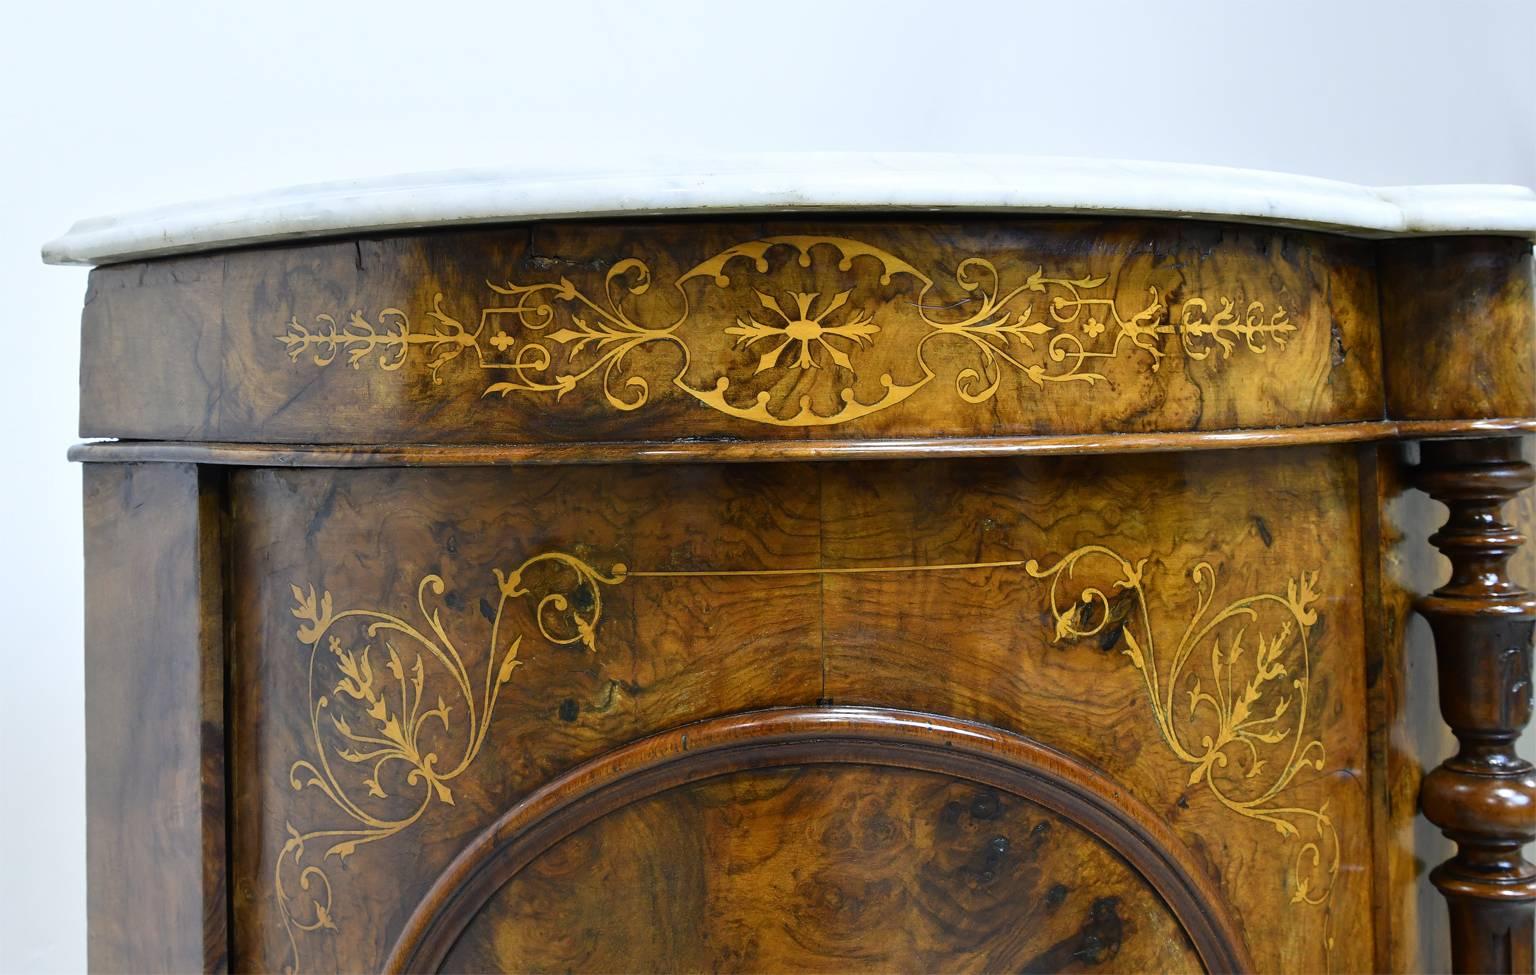 Carrara Marble 19th Century English Sideboard in Burl Walnut with Marquetry withMarble Top